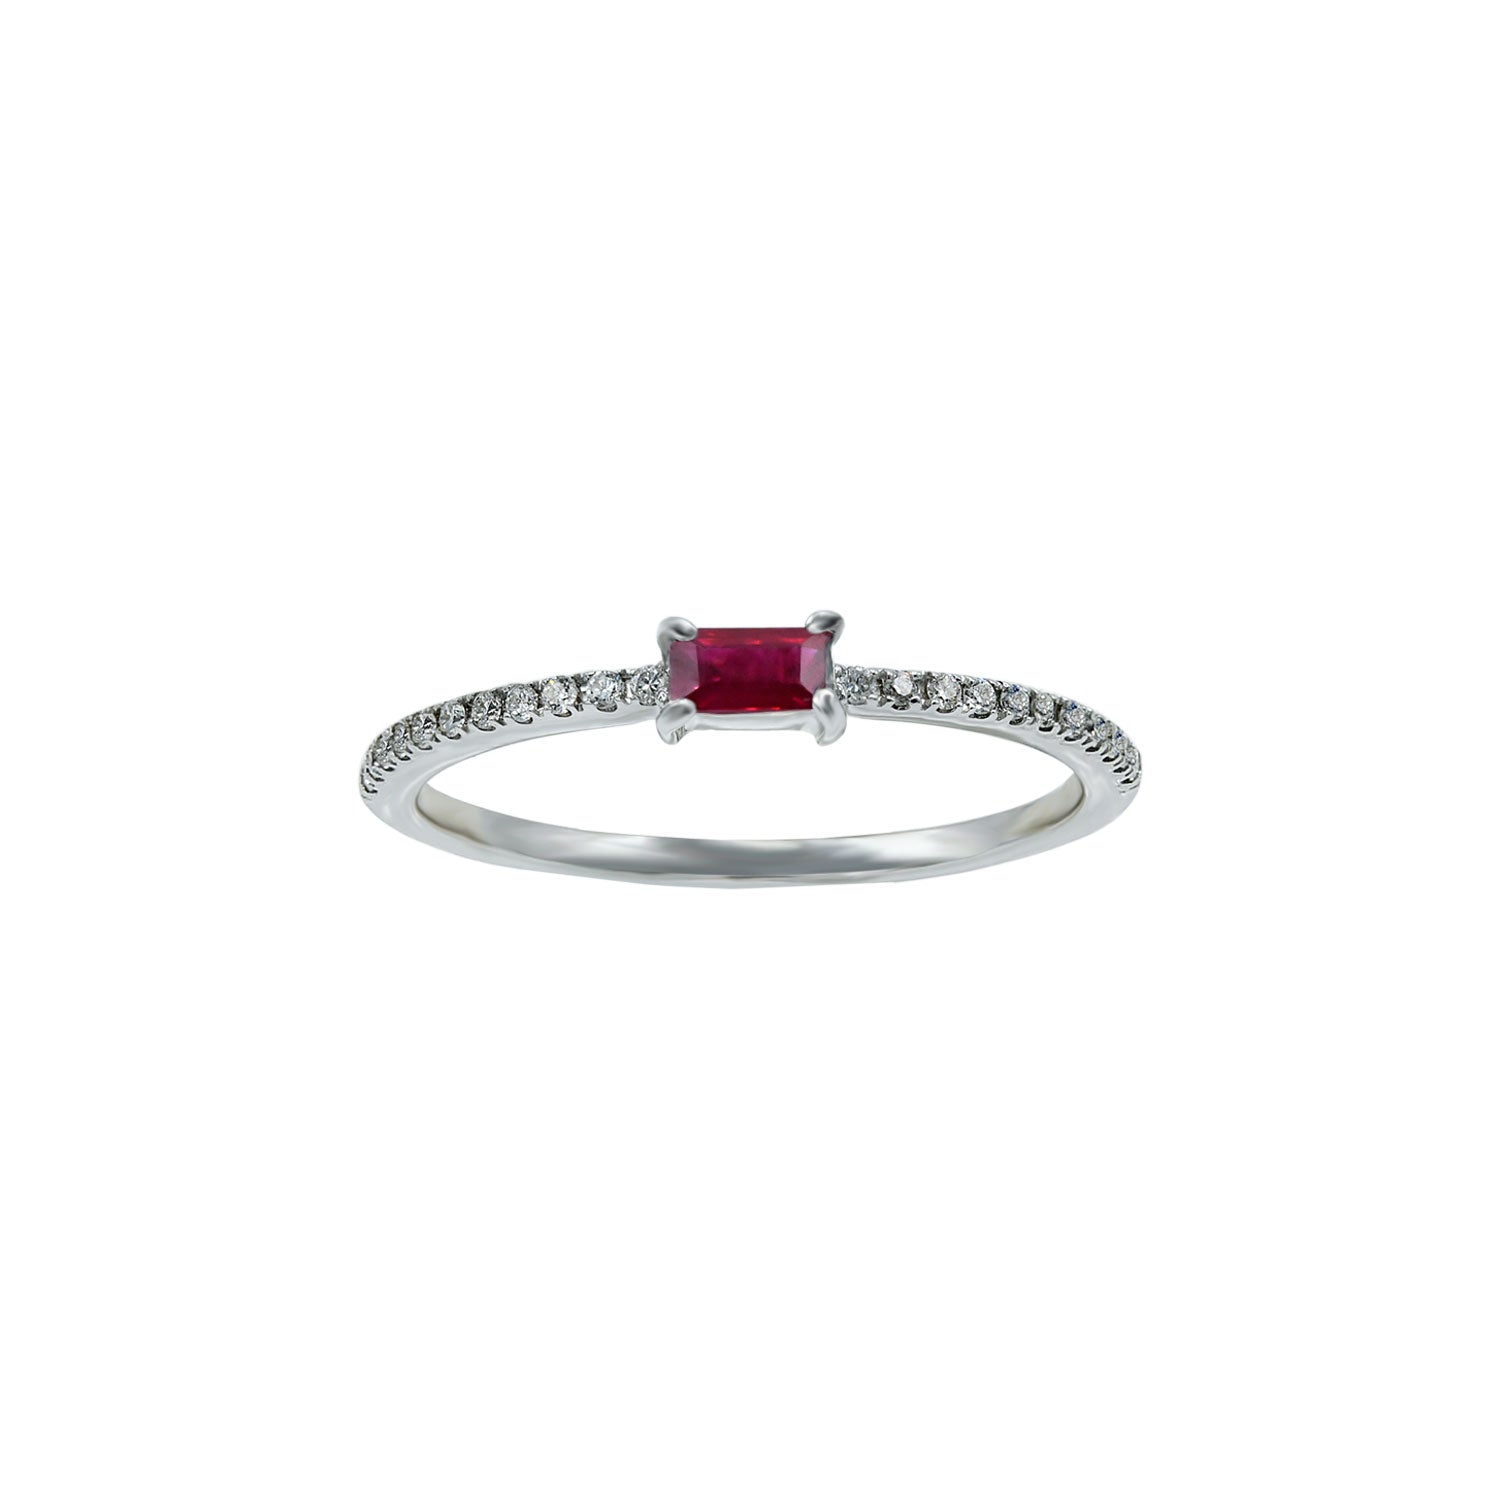 Ruby ring. Ruby and diamond ring.